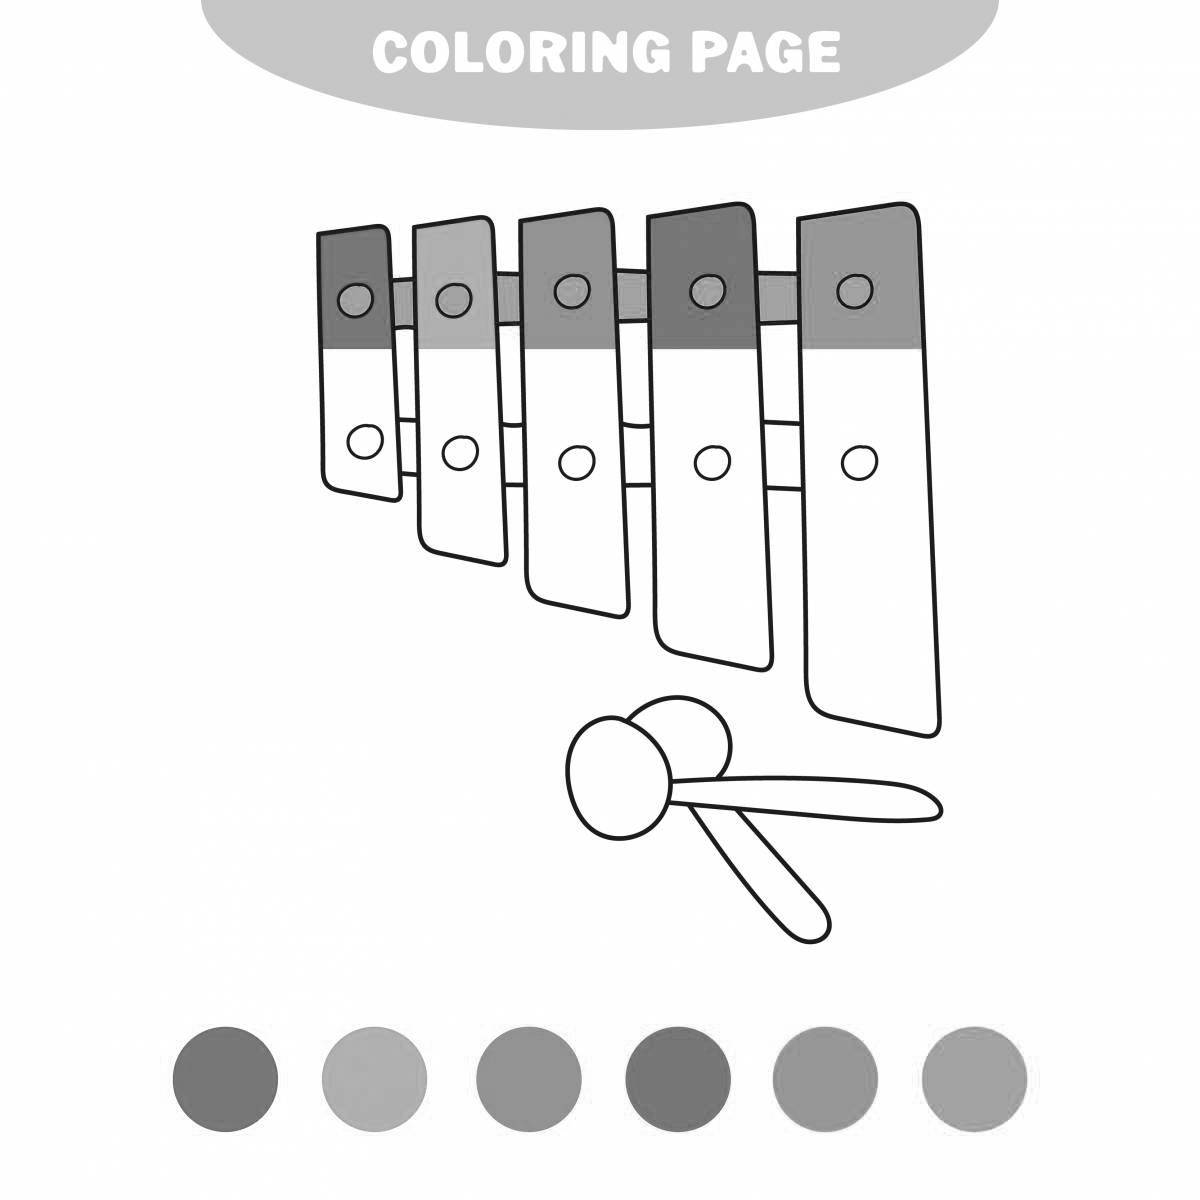 Shining Xylophone coloring book for little ones